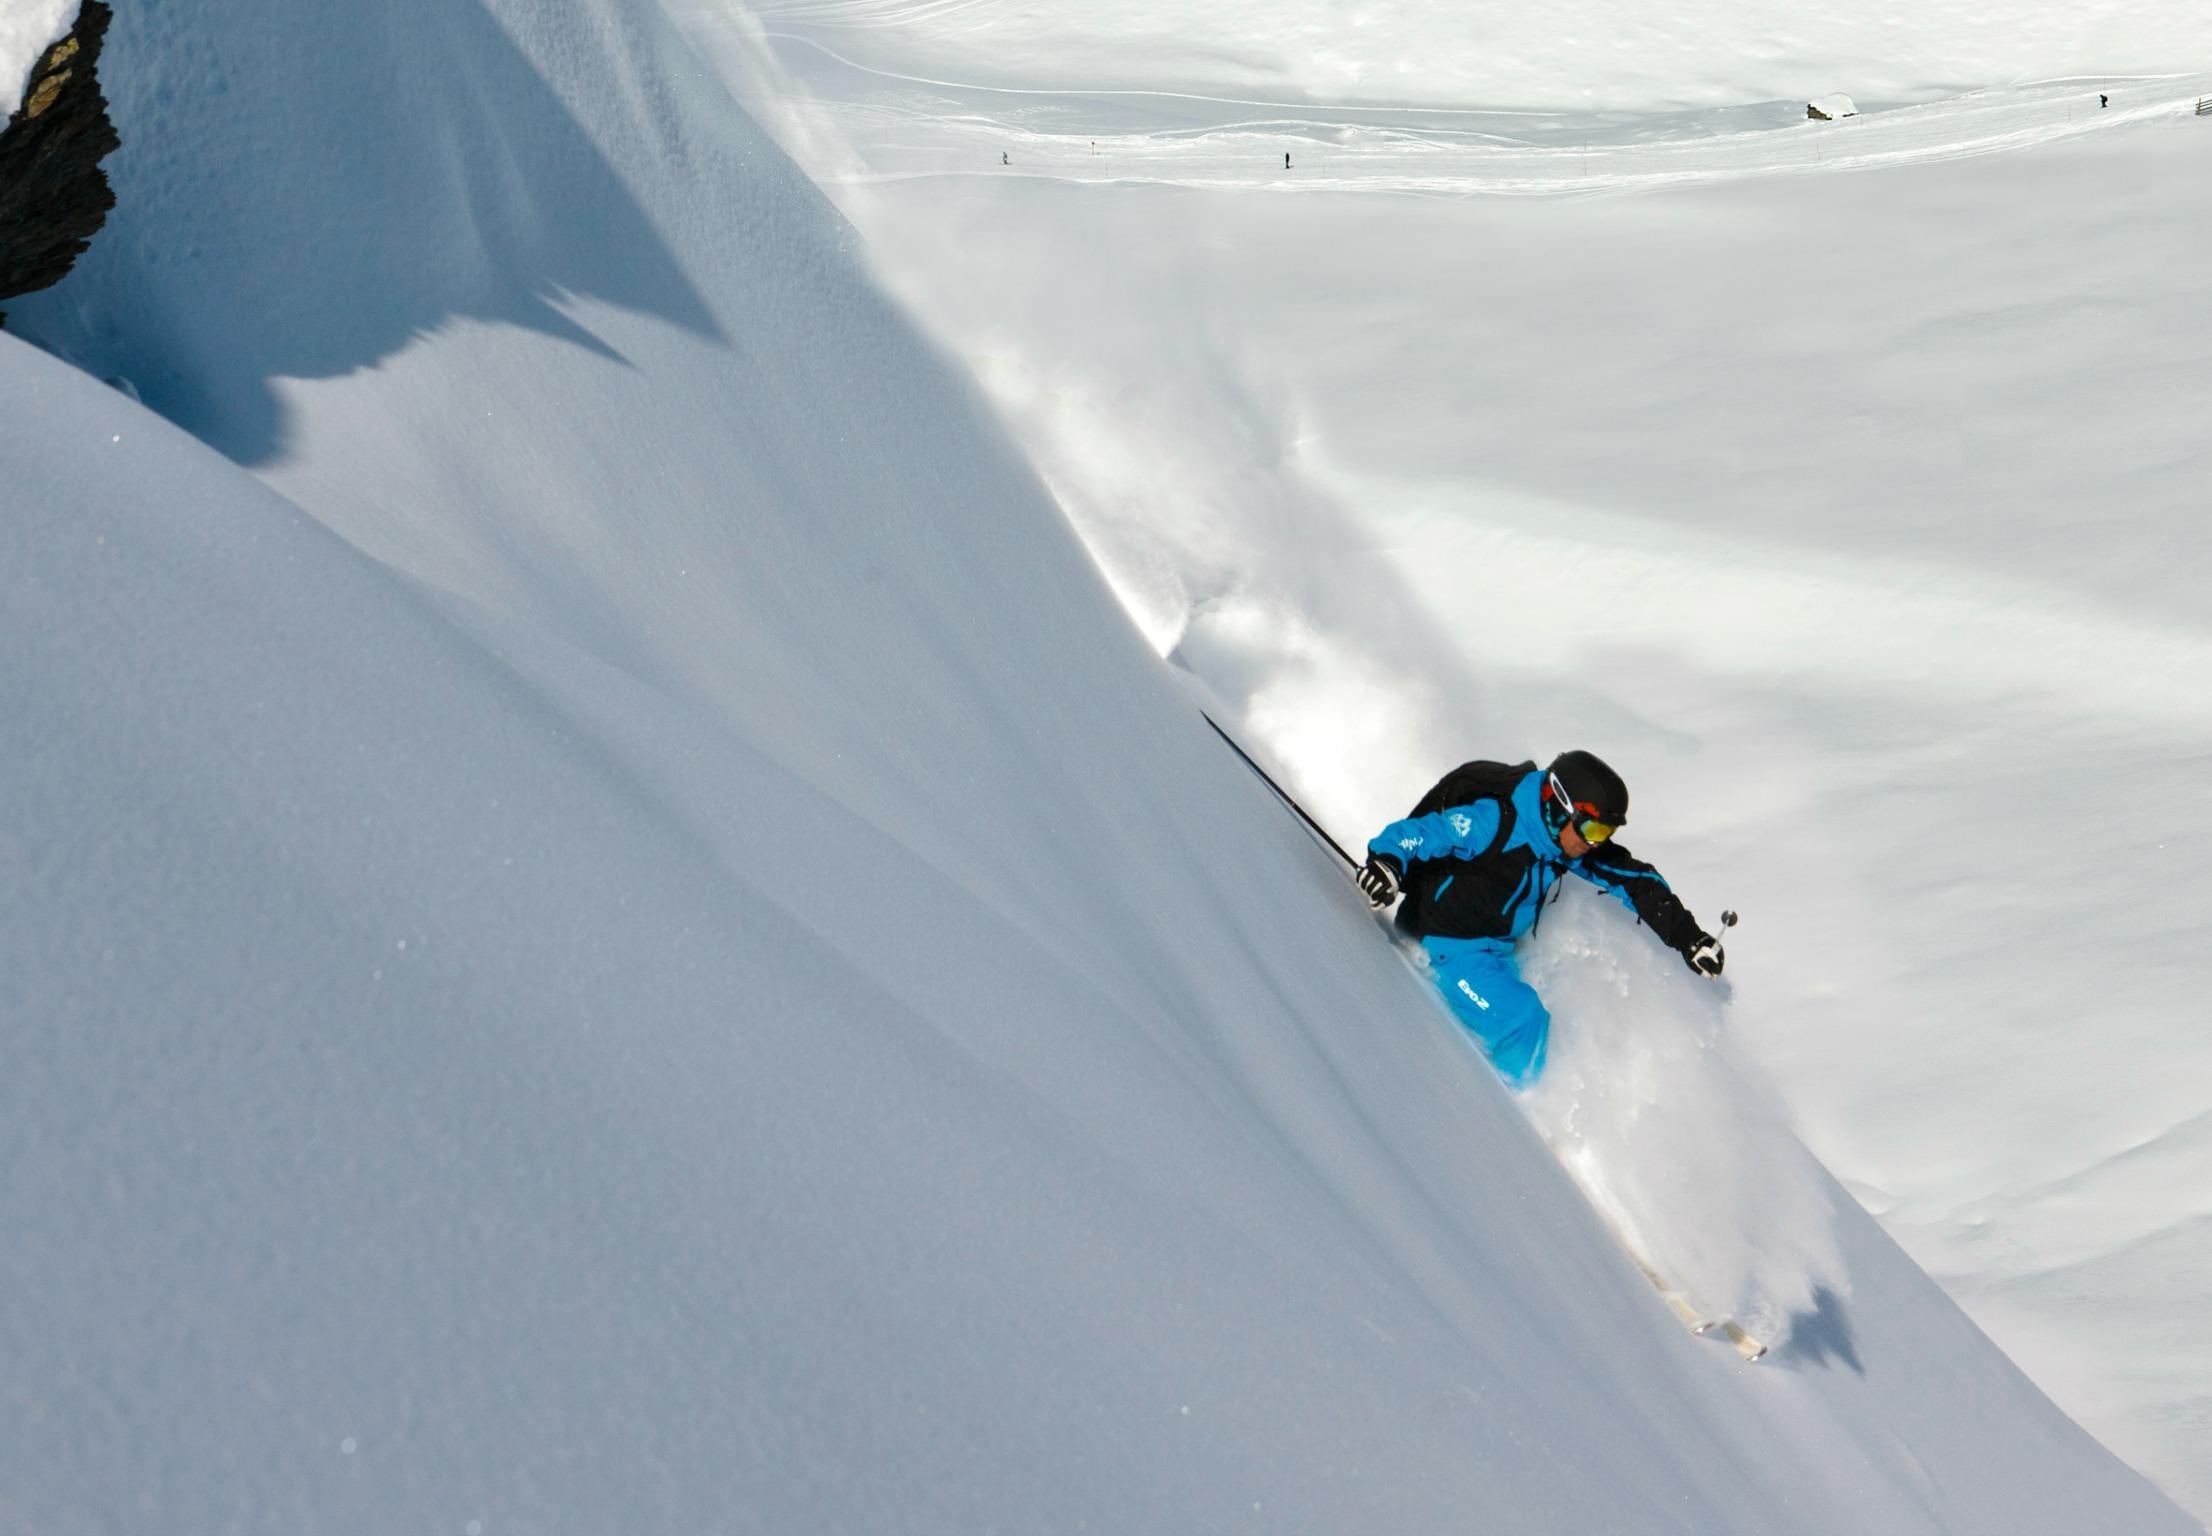 Extreme skiing in Les Arcs. Skiiers are said to outnumber snowboarders eight to one